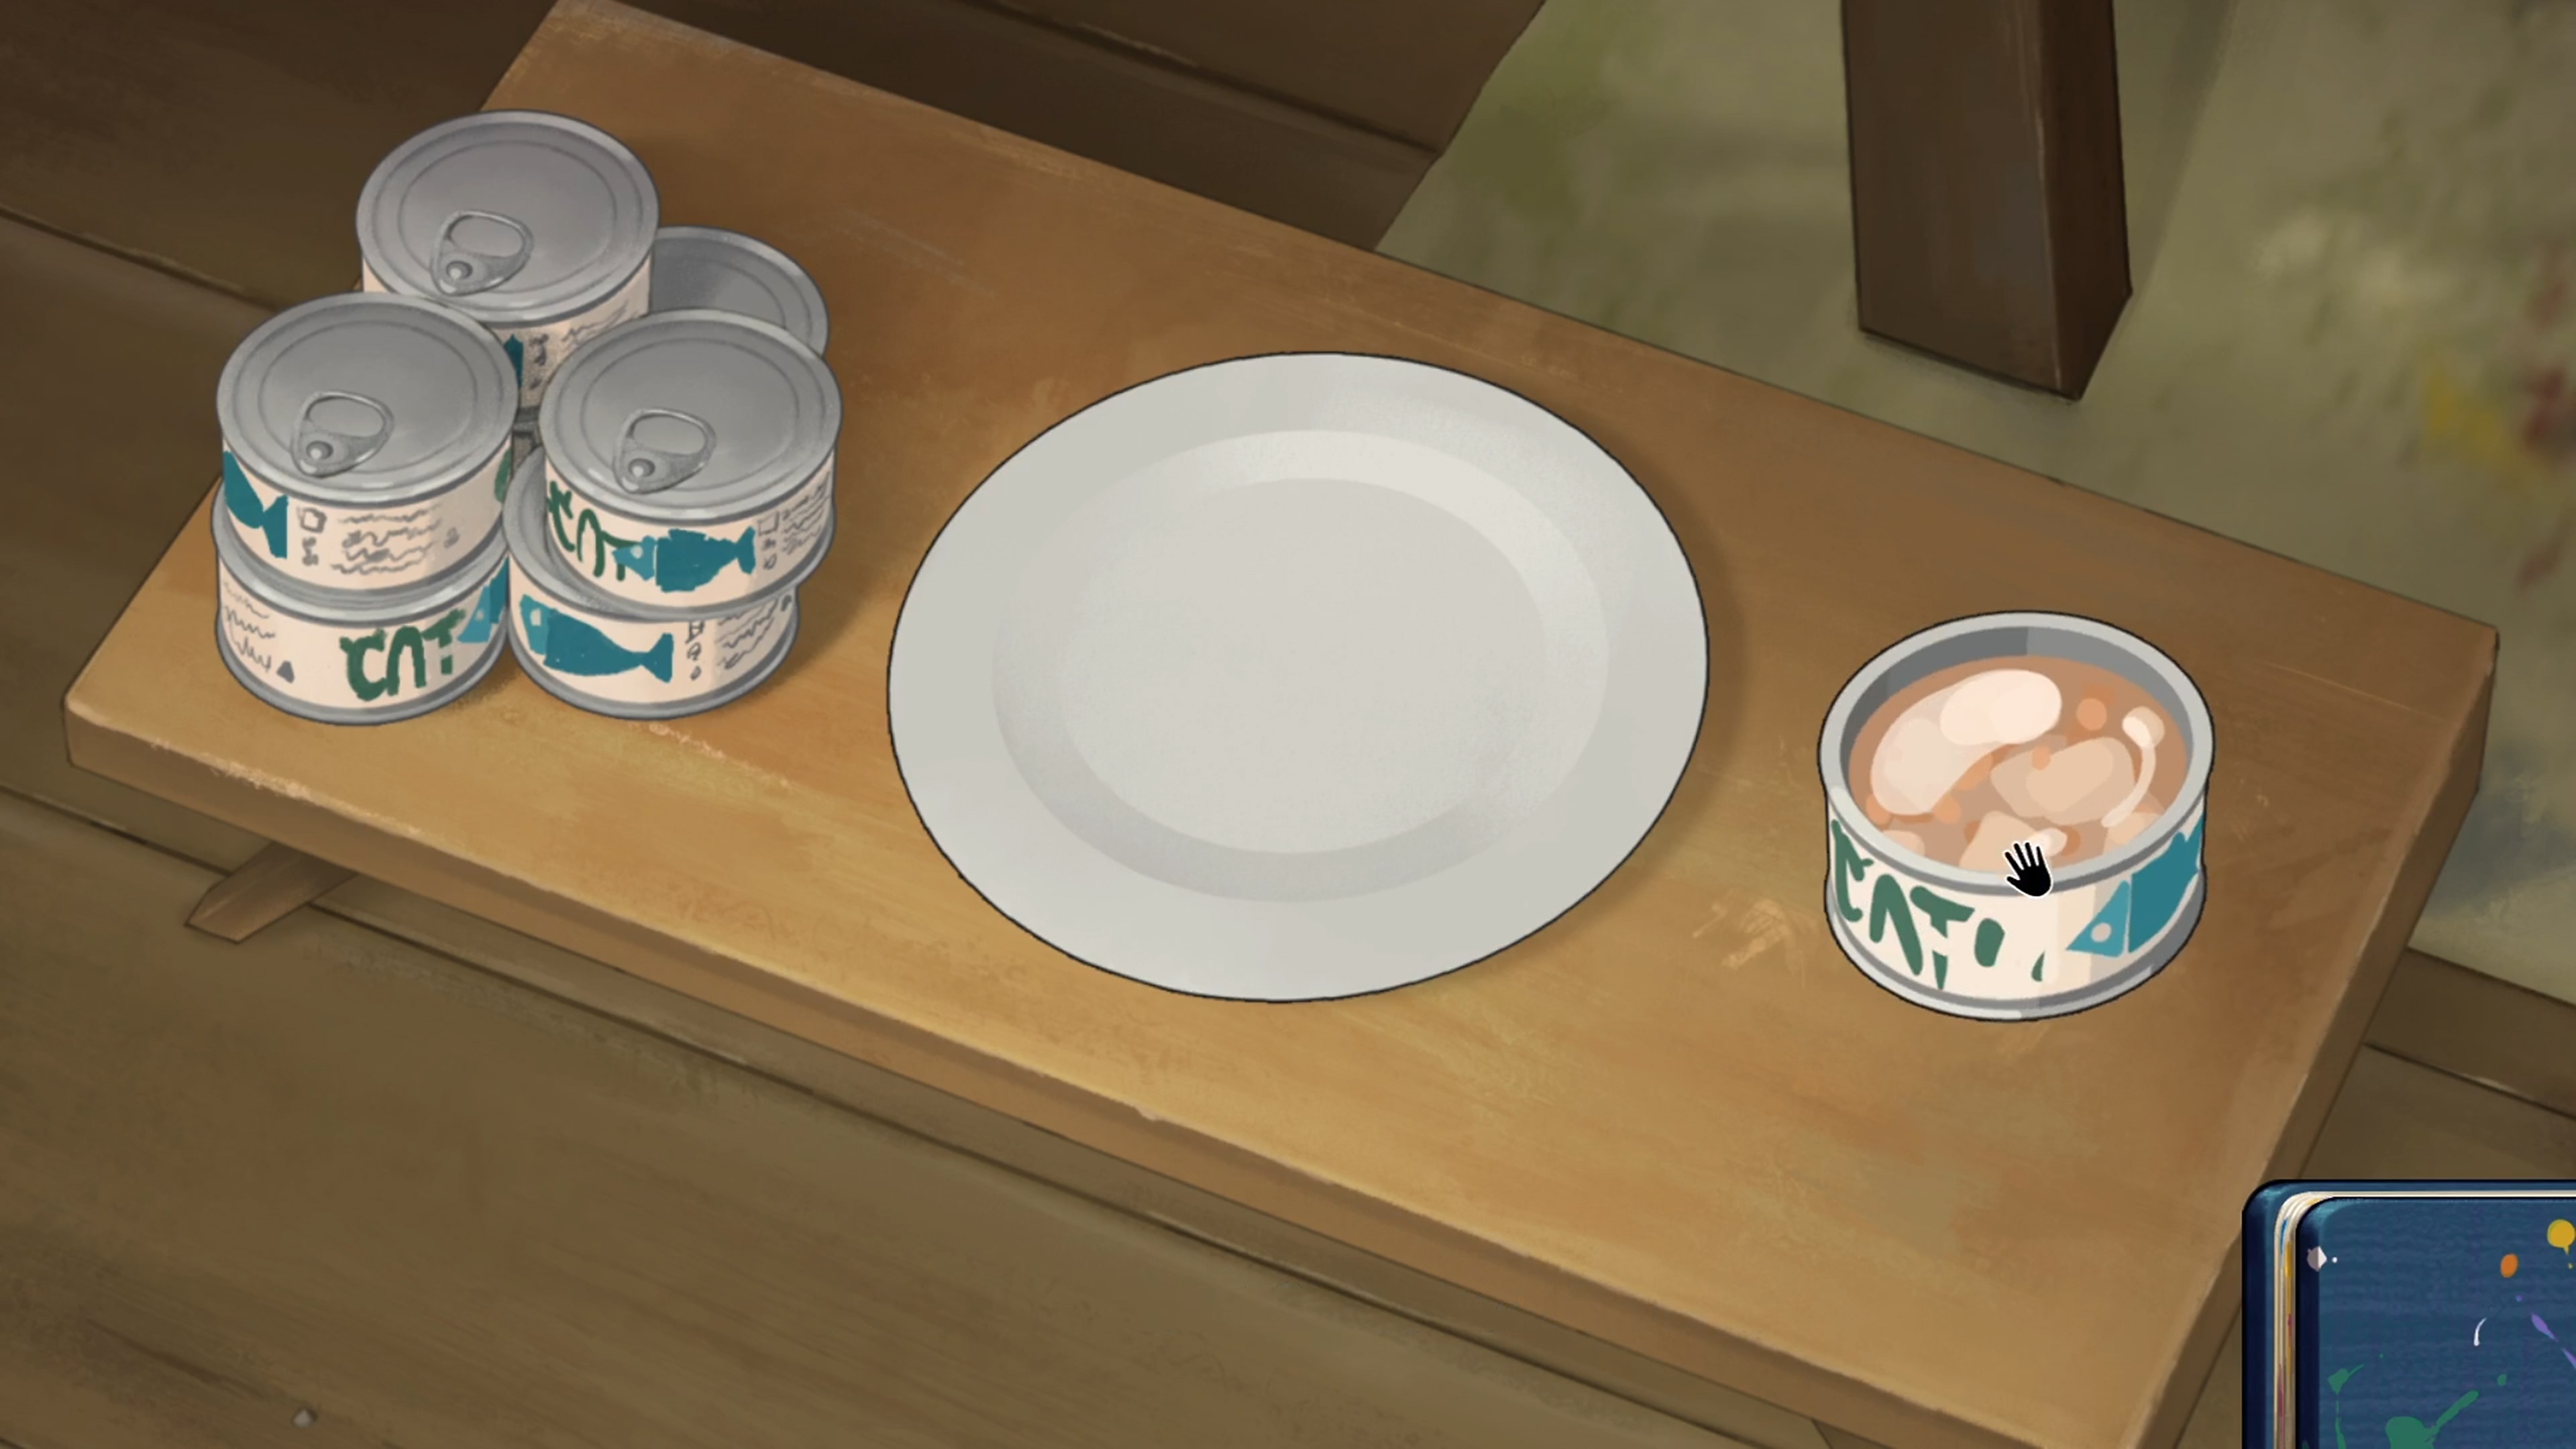 Behind the Frame: The Finest Scenery screenshot showing a plate and tins of cat food on a table